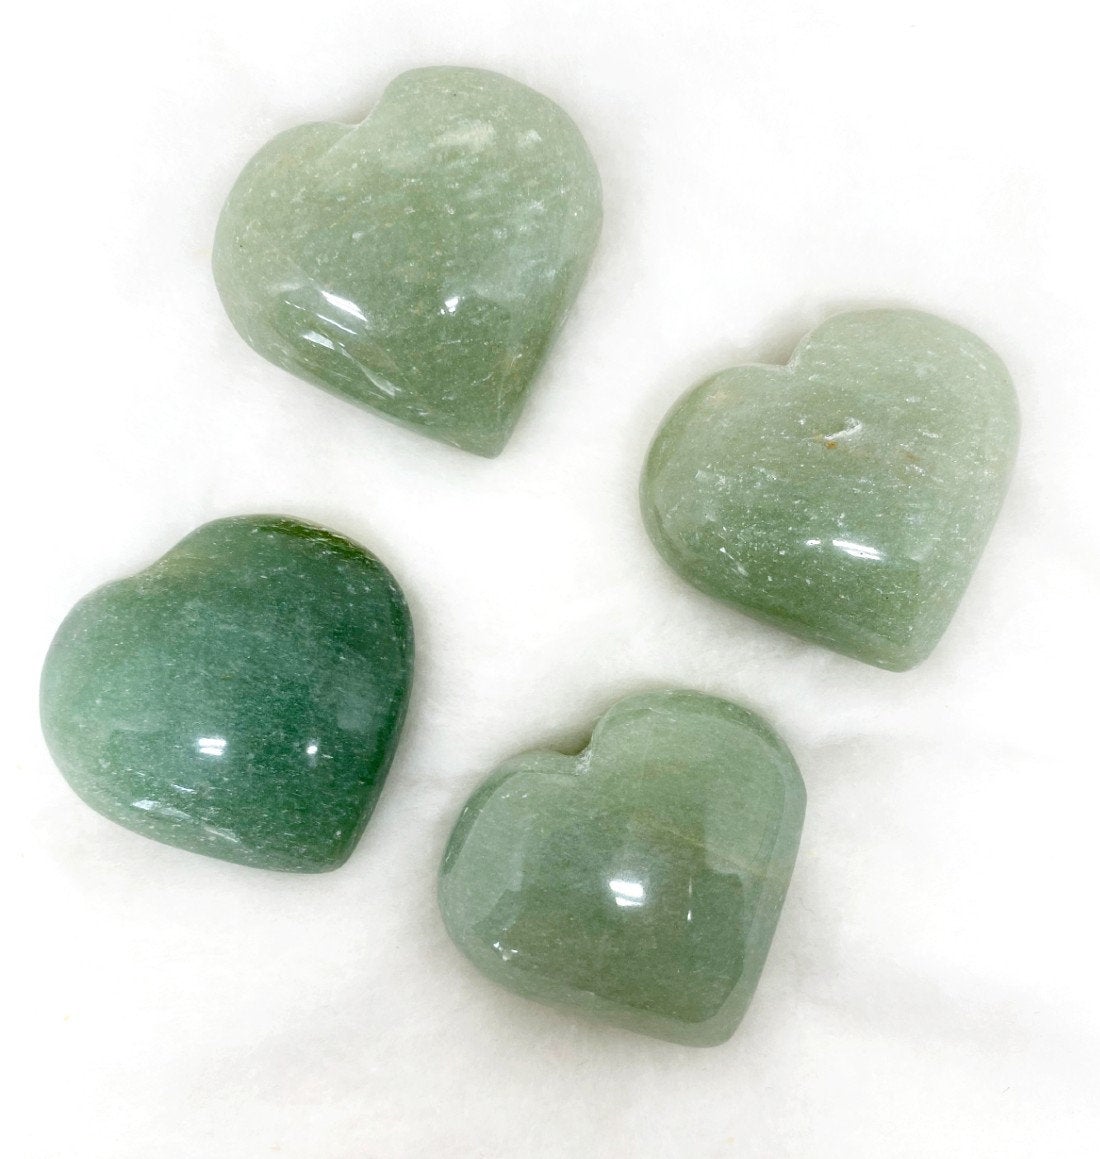 Buy Best Green Aventurine Hearts Crystal Products Online - Soothing Crystals